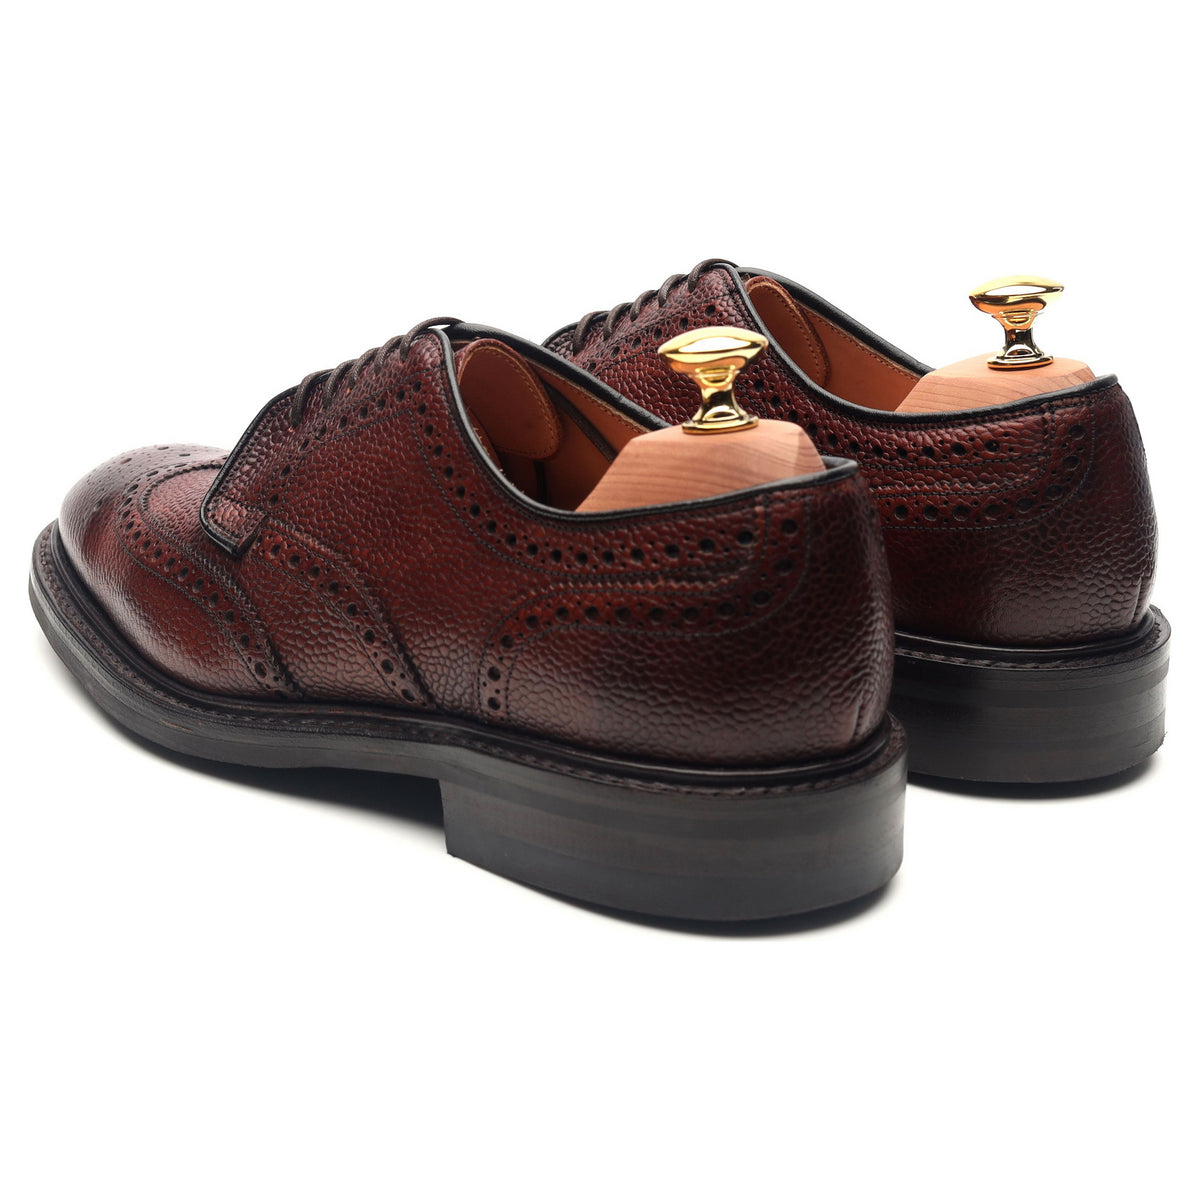 Bexhill' Burgundy Leather Derby Brogues UK 6.5 F - Abbot's Shoes